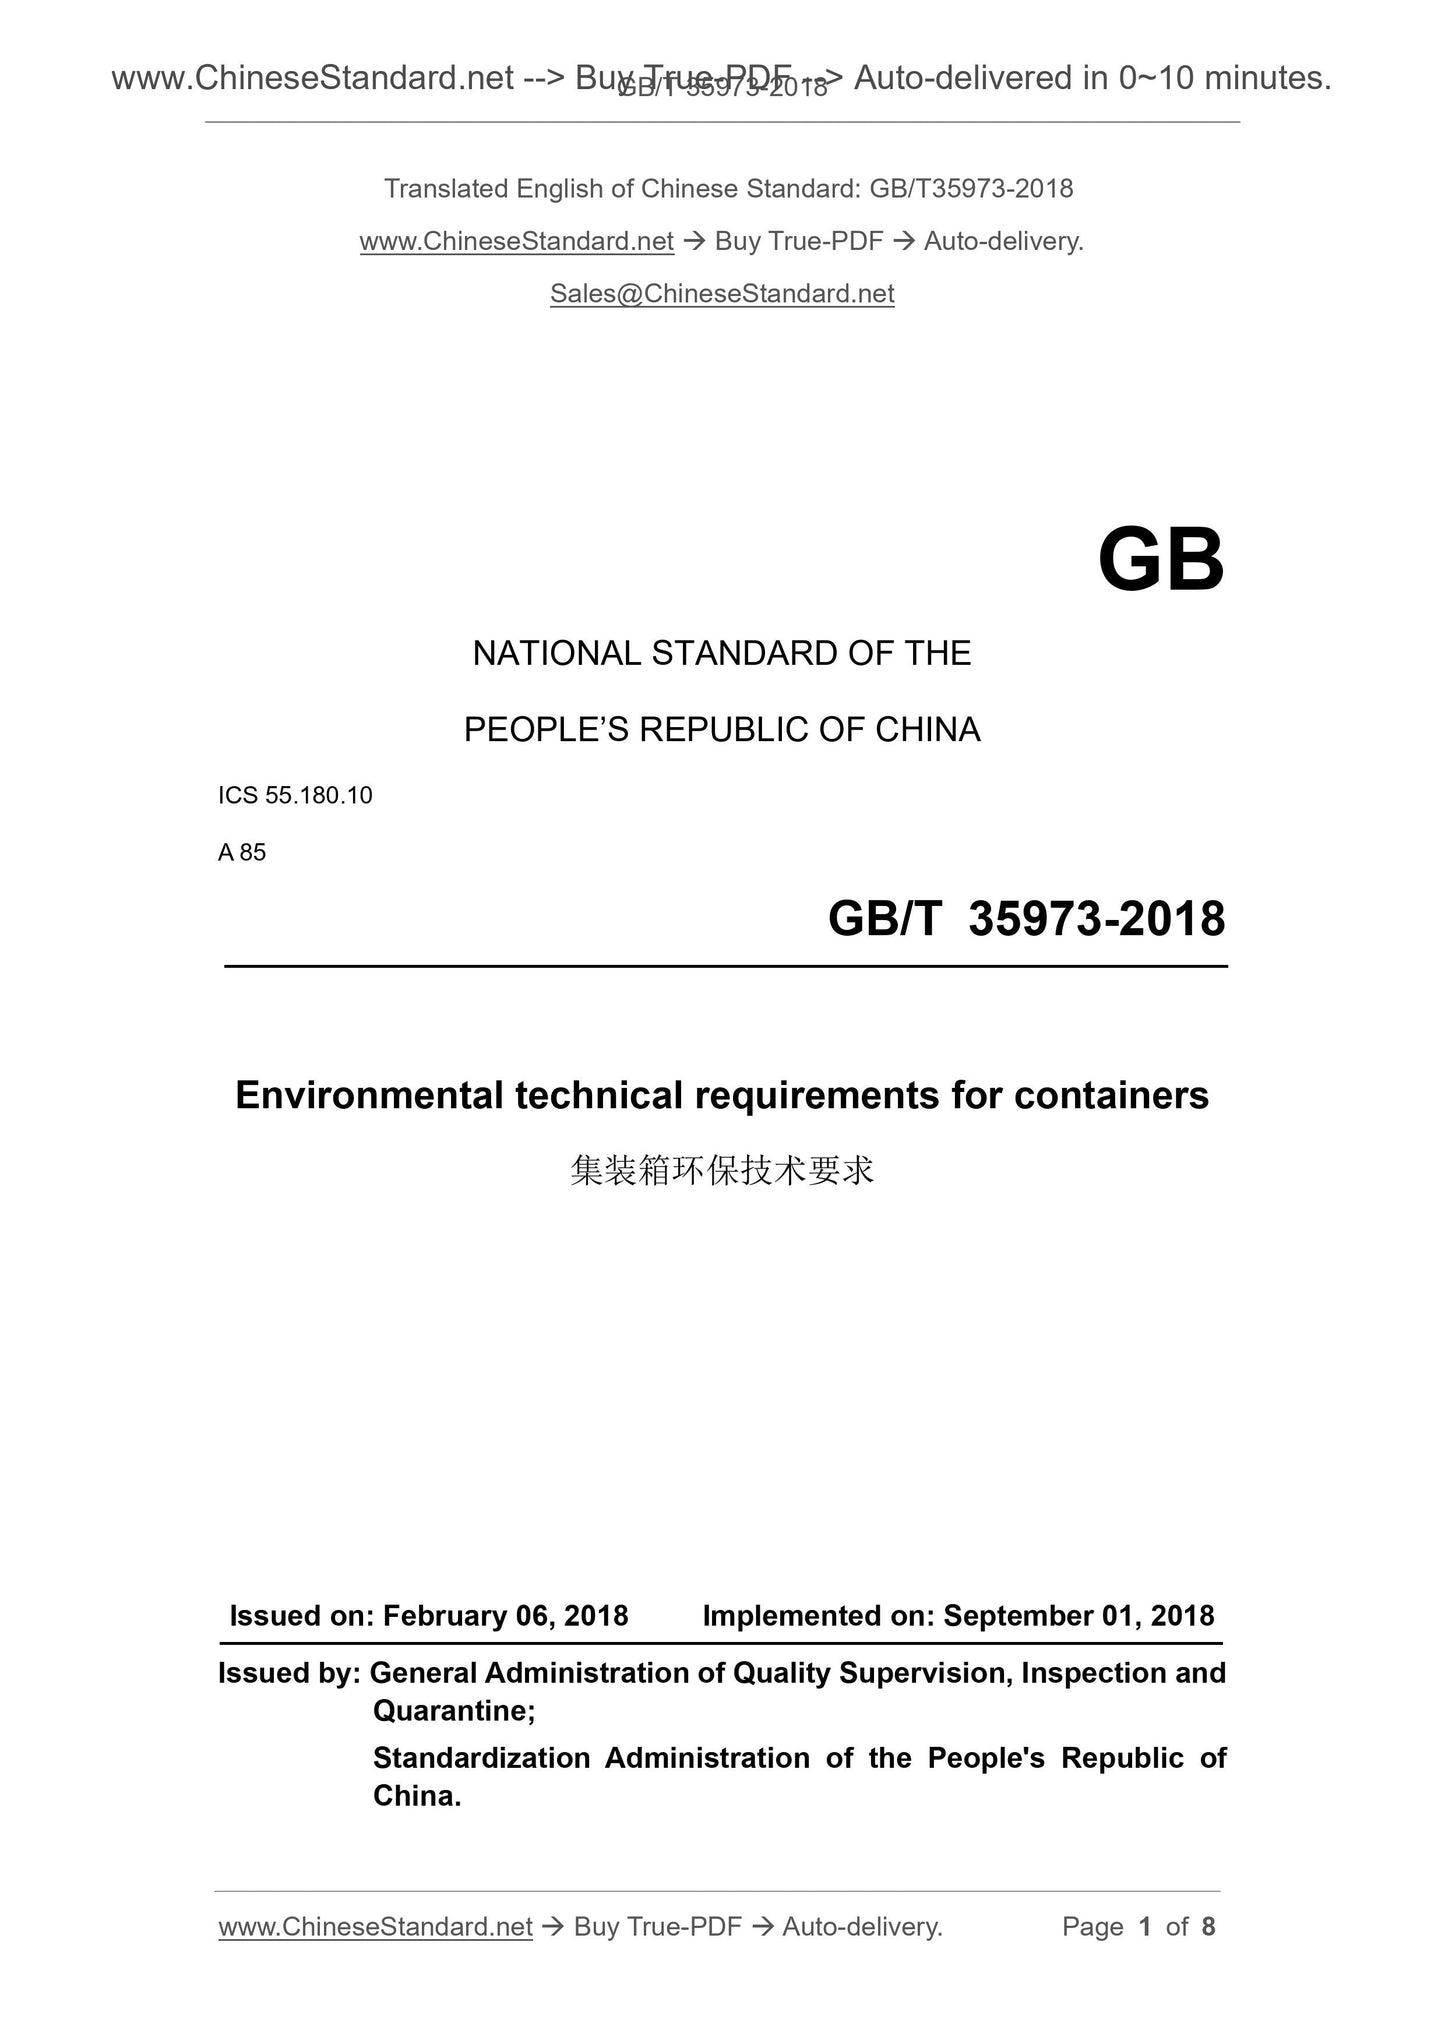 GB/T 35973-2018 Page 1